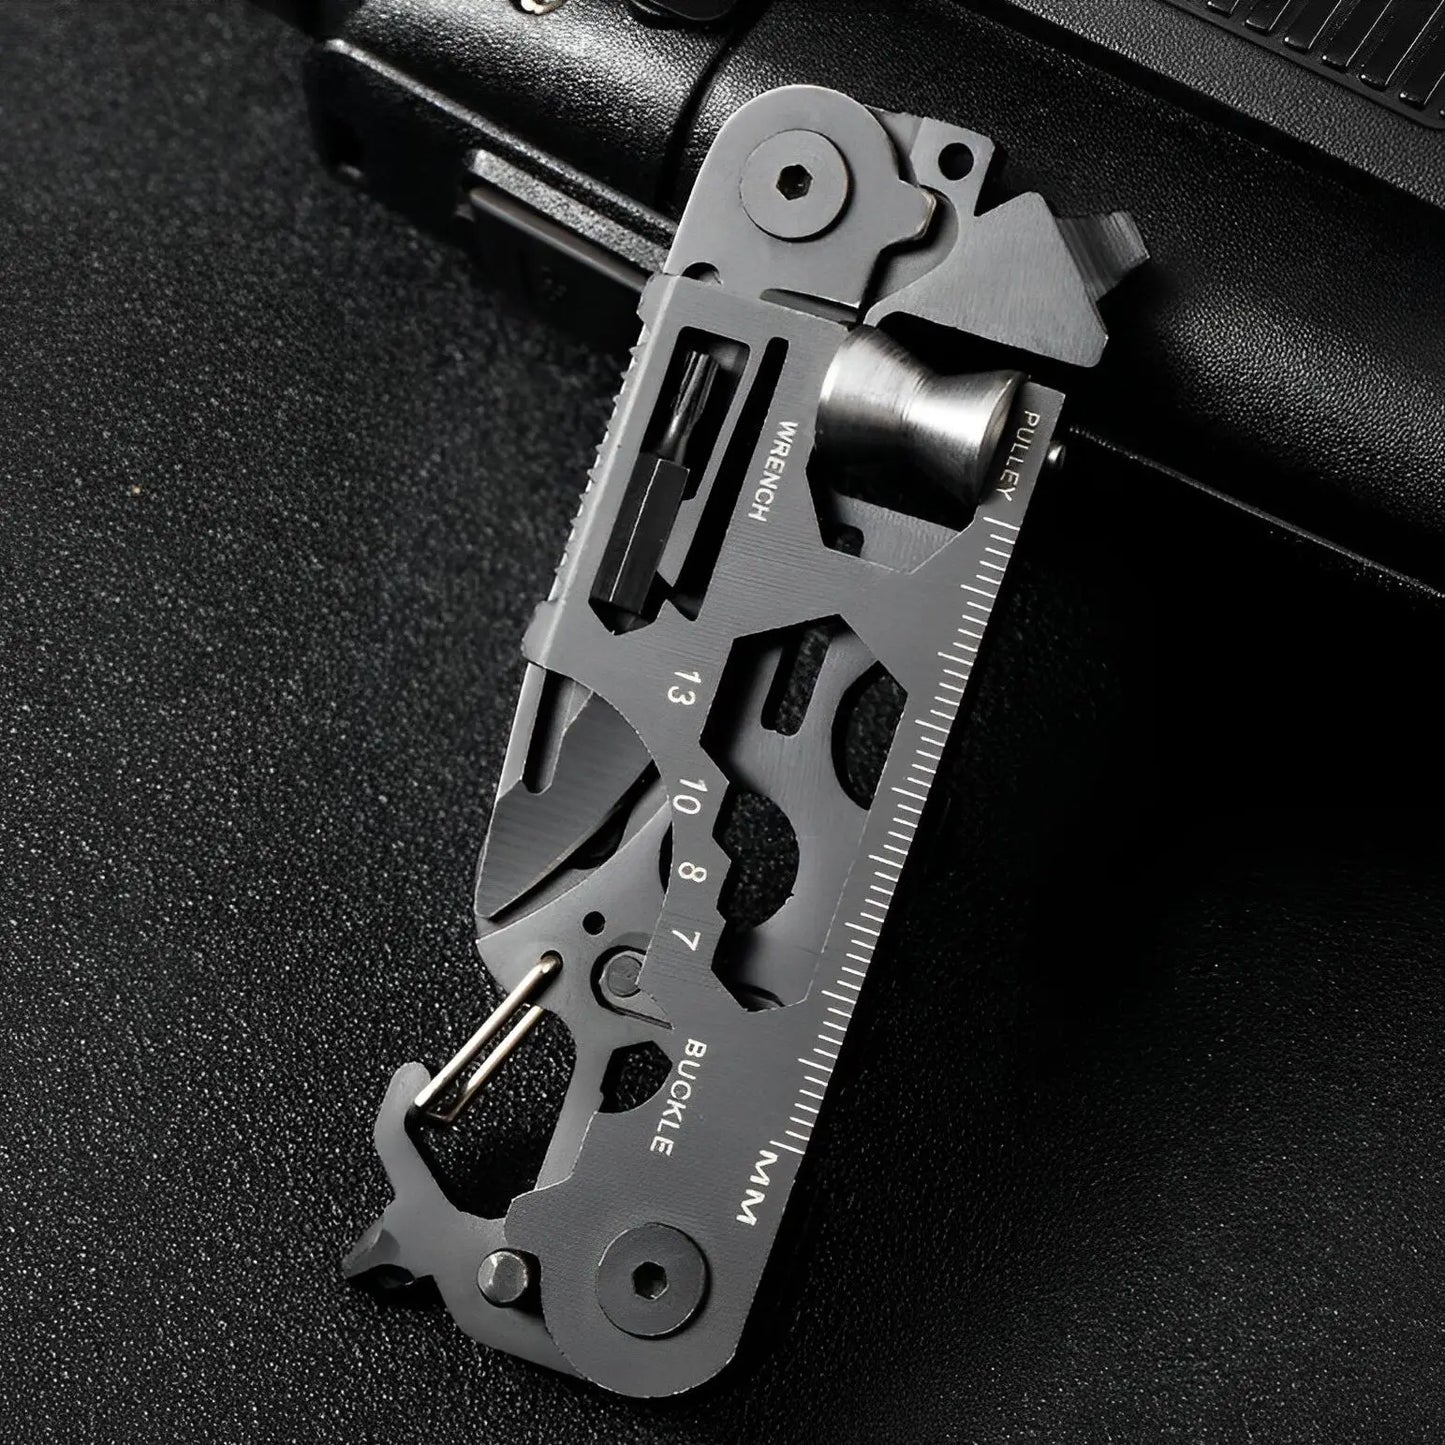 Multifunctional Outdoor Pocket Tool Combination Card Folding Tactical Army Knife Mini Bicycle Repair EDC Camping Gear Equipment